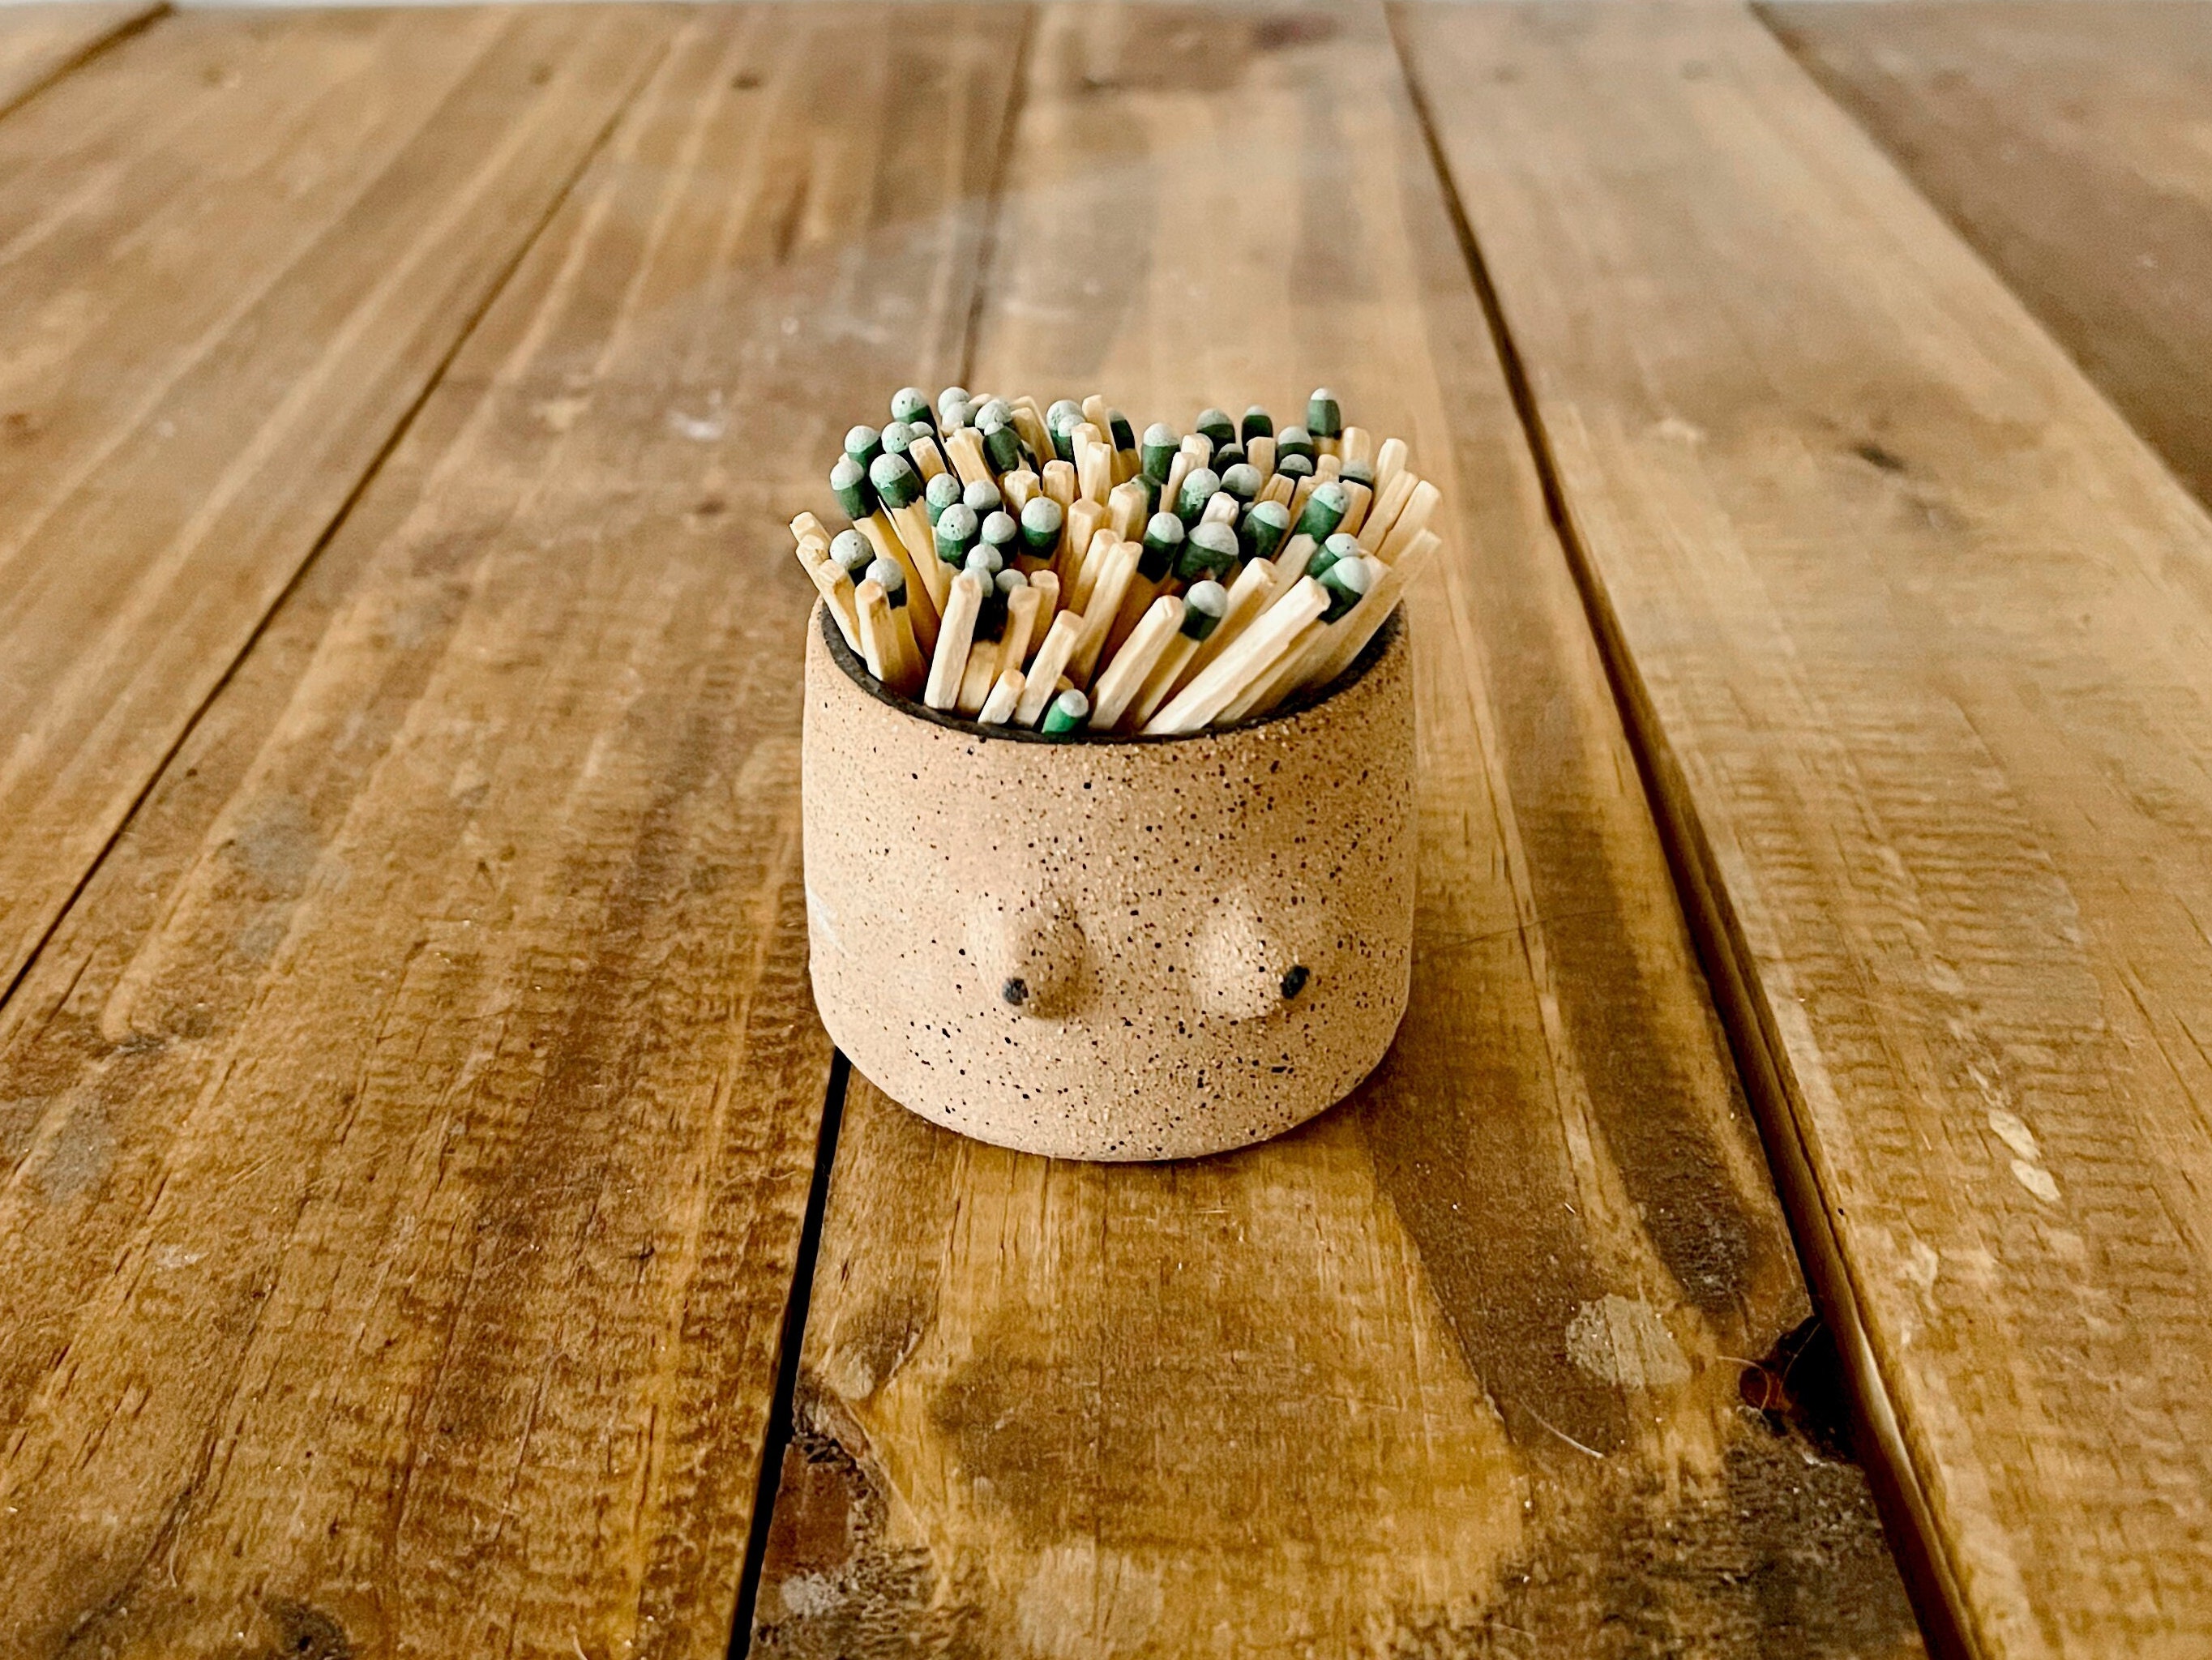 Strike Anywhere Wood Matches, Sticks Wooden Matches 20mm